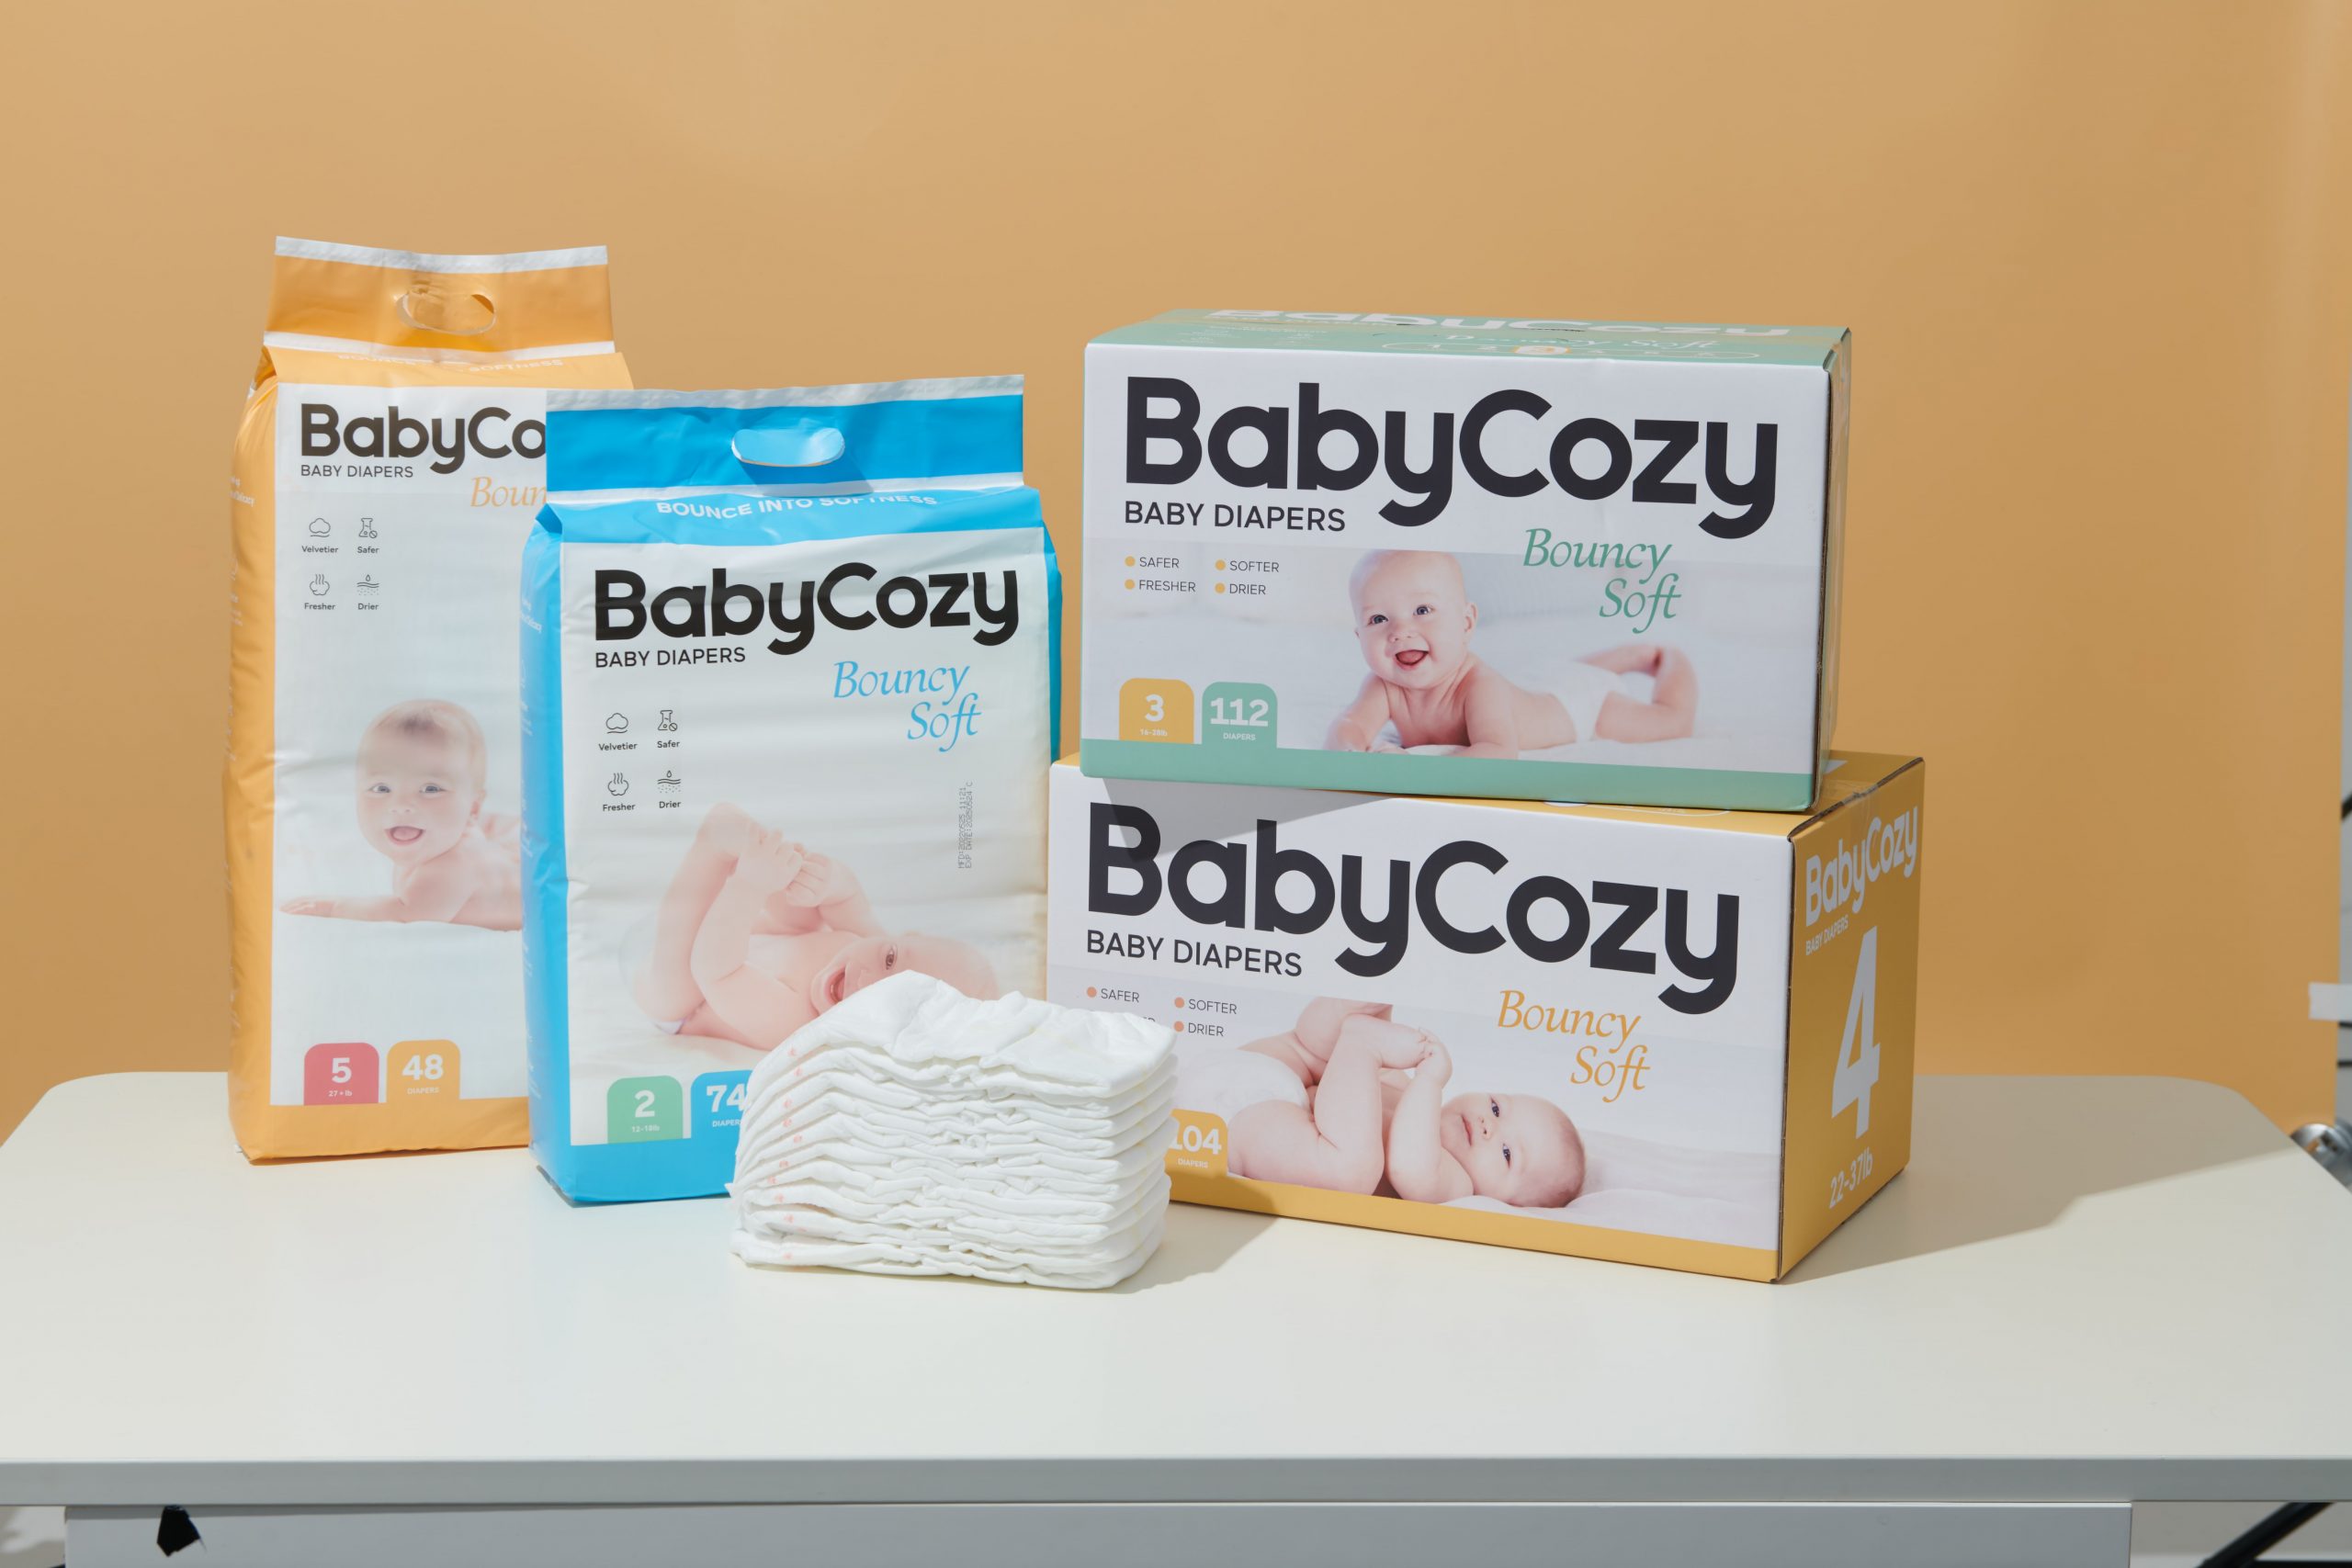 BabyCozy “Bouncy Soft” Diapers